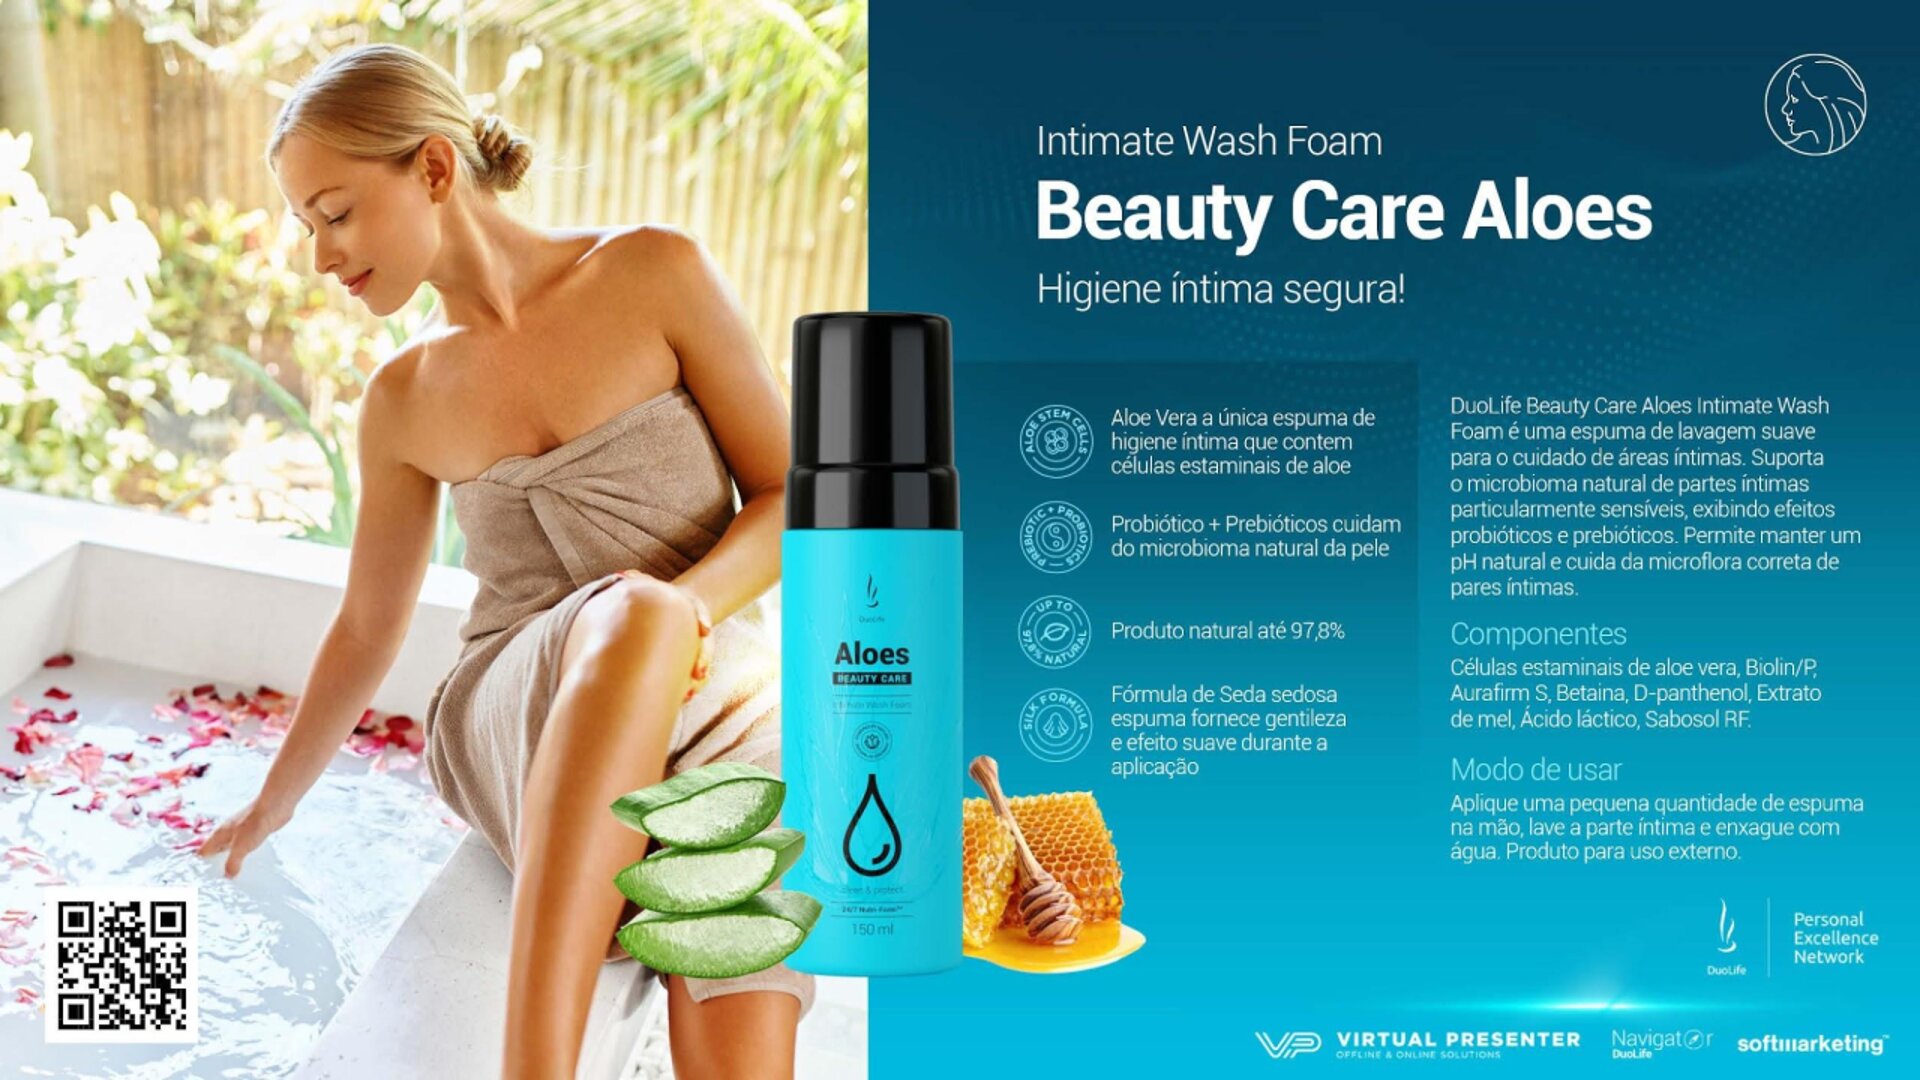 Beauty Care Aloes - Intimate Wash Foam